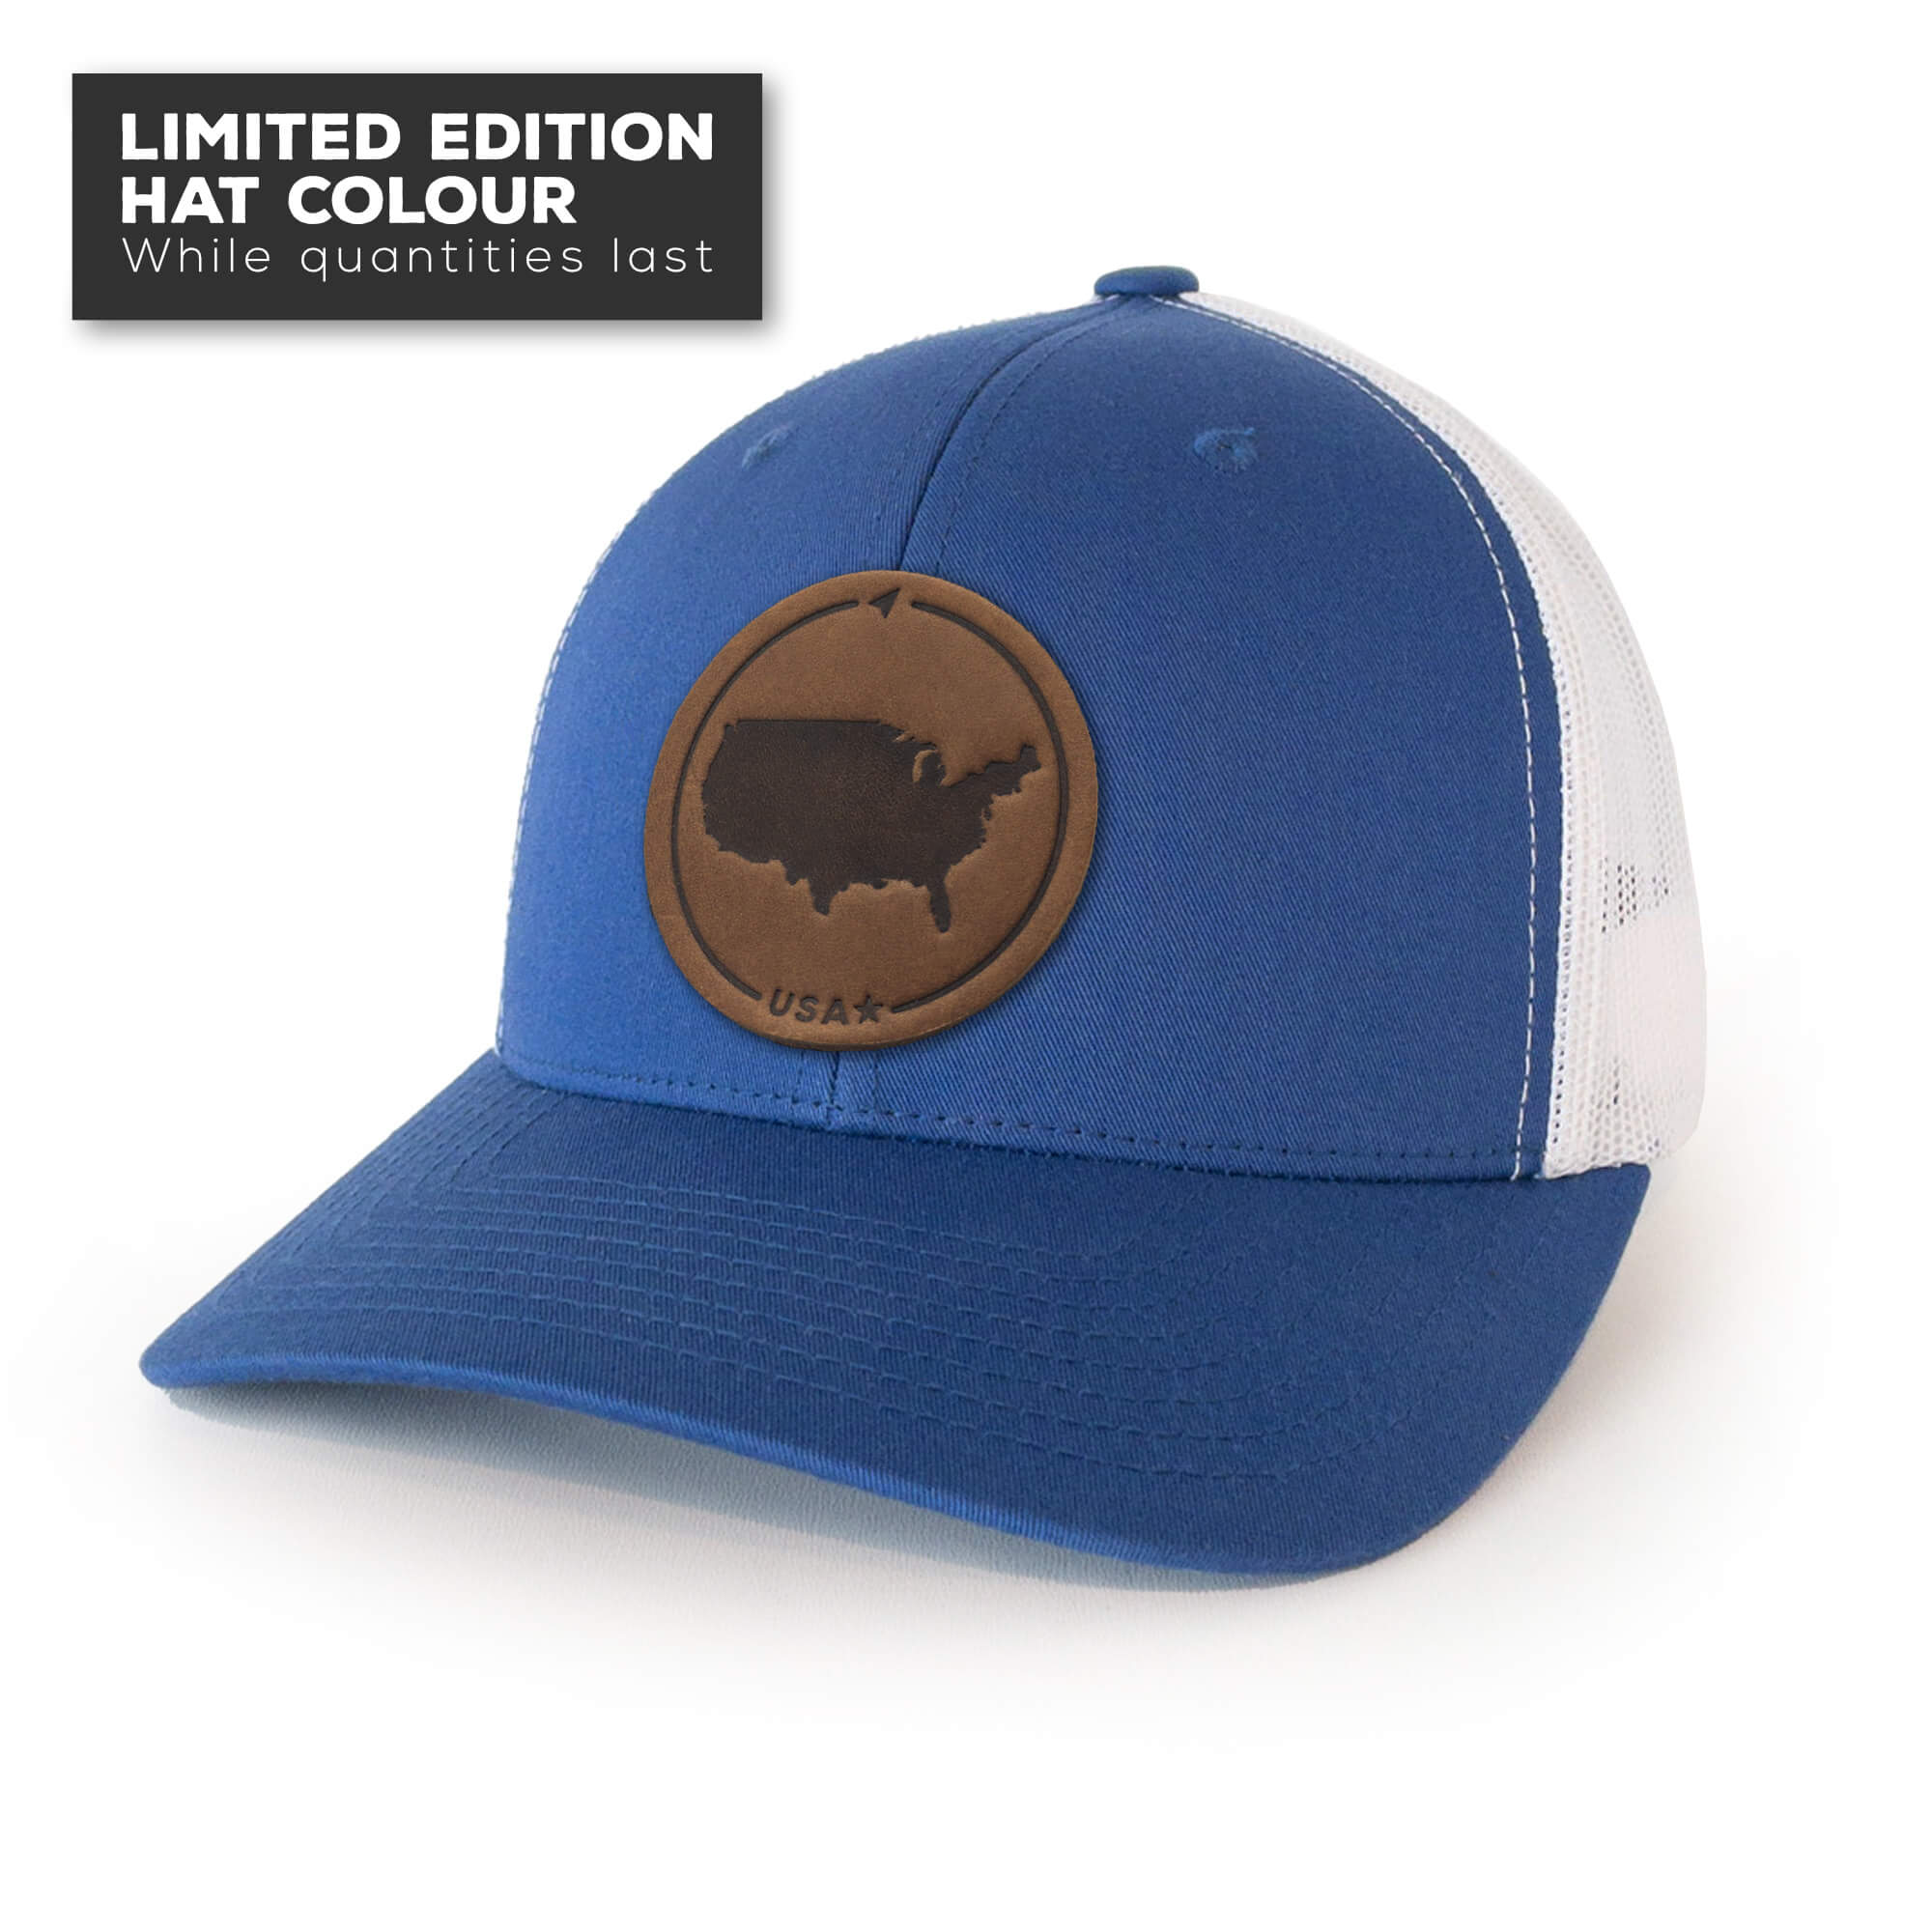 Royal Blue trucker hat with full-grain leather patch of USA